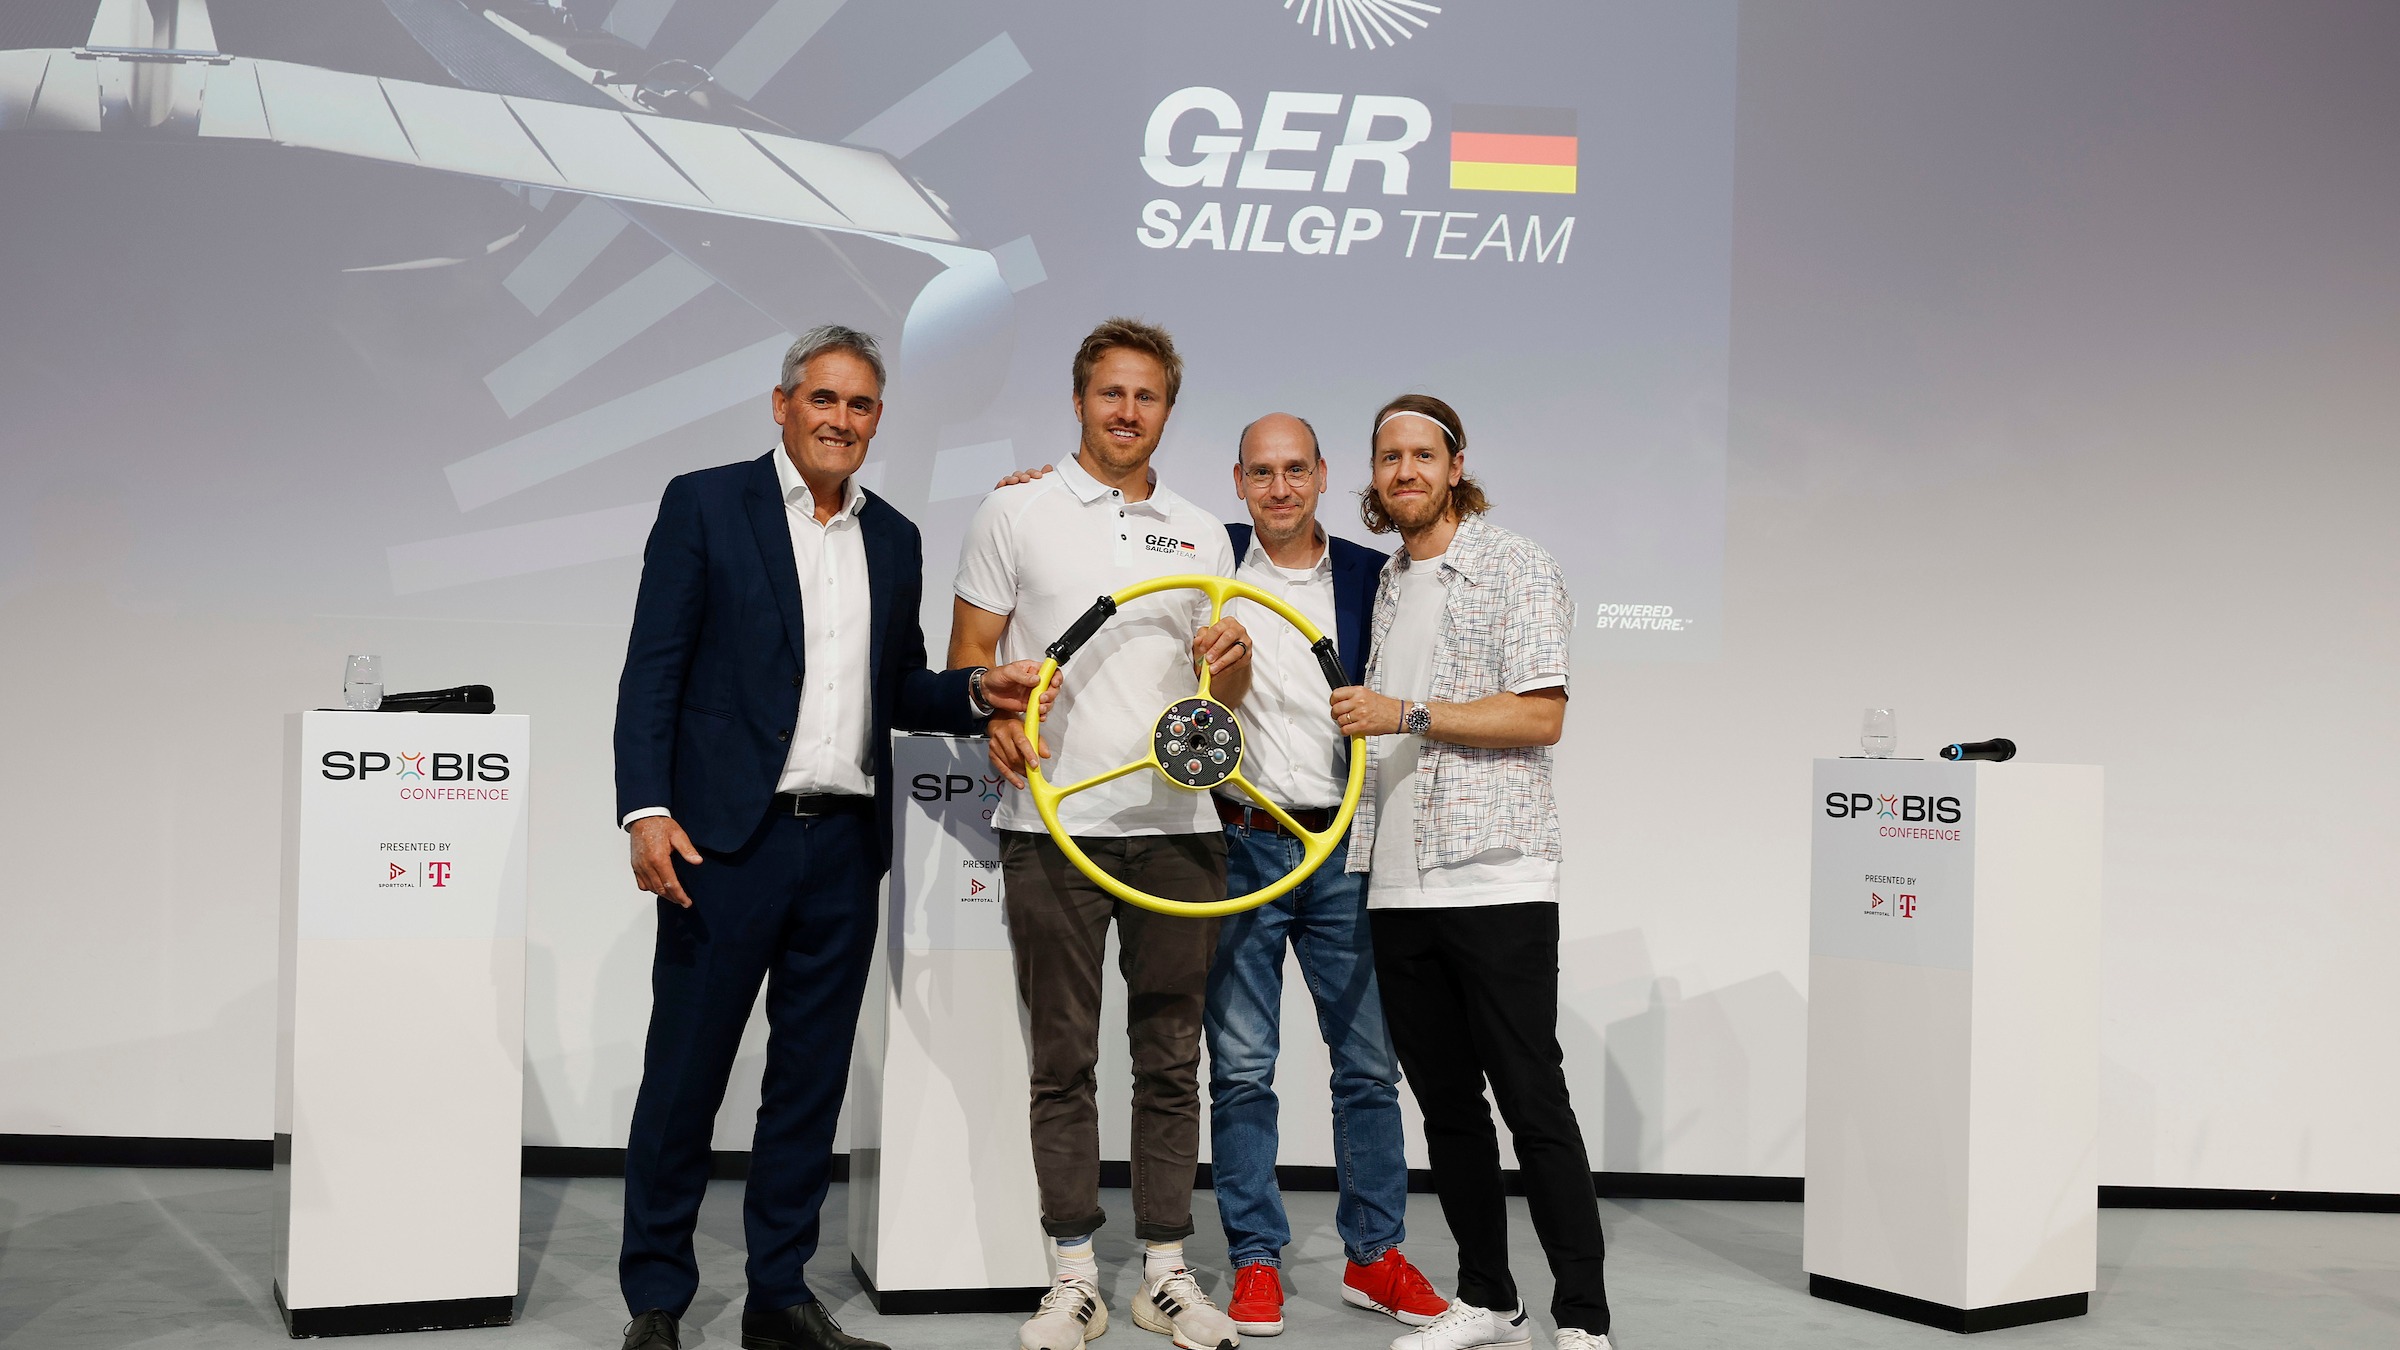 Season 4 // Germany SailGP Team // Germany team announcement at conference 